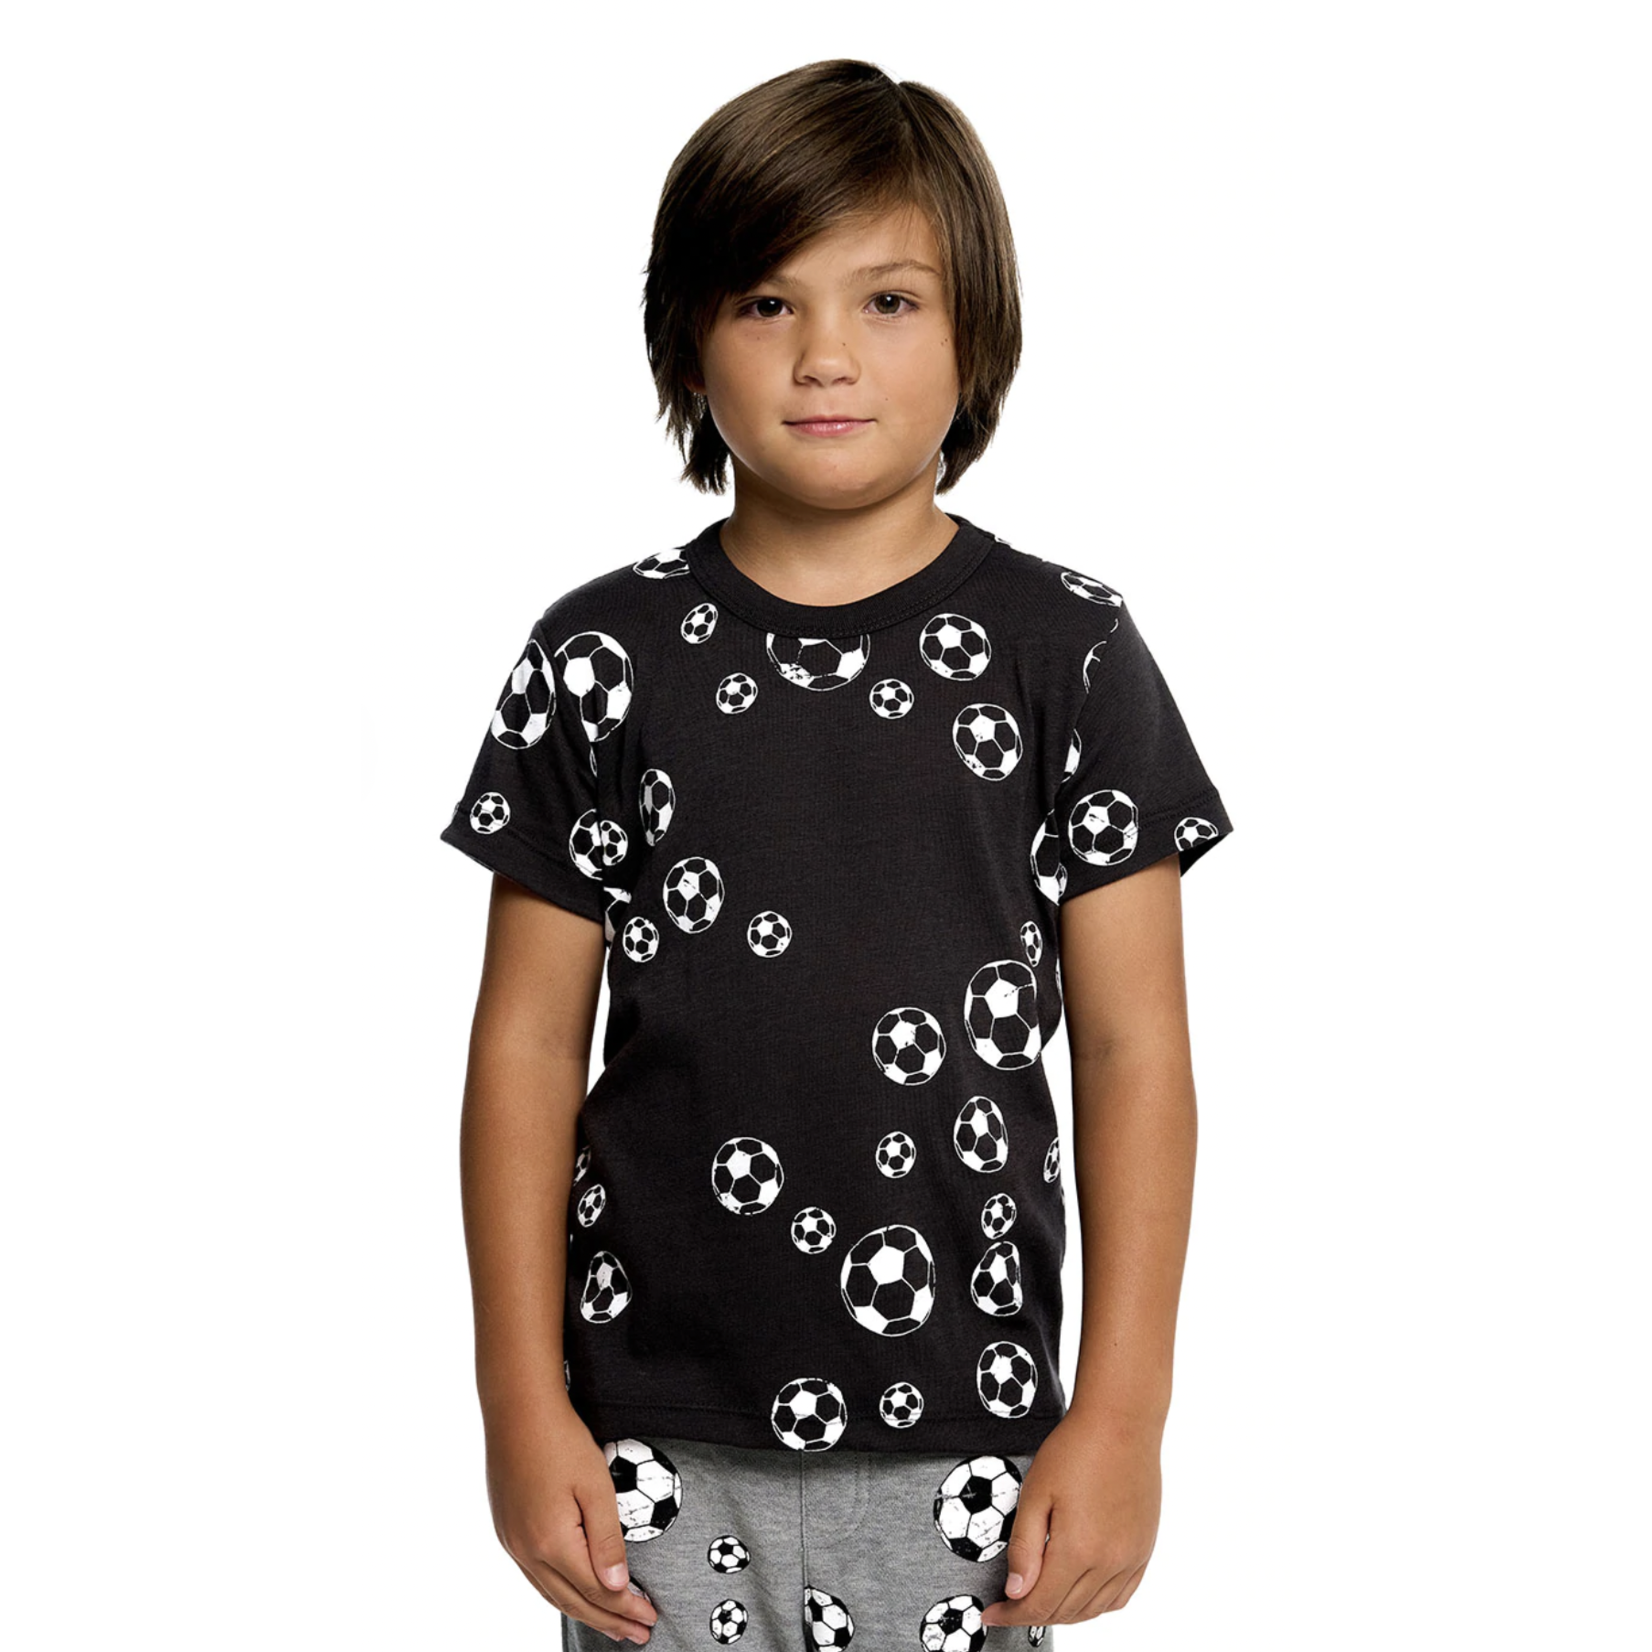 CHASER SOCCER PLAYER CLOUD JERSEY KIDS TEE